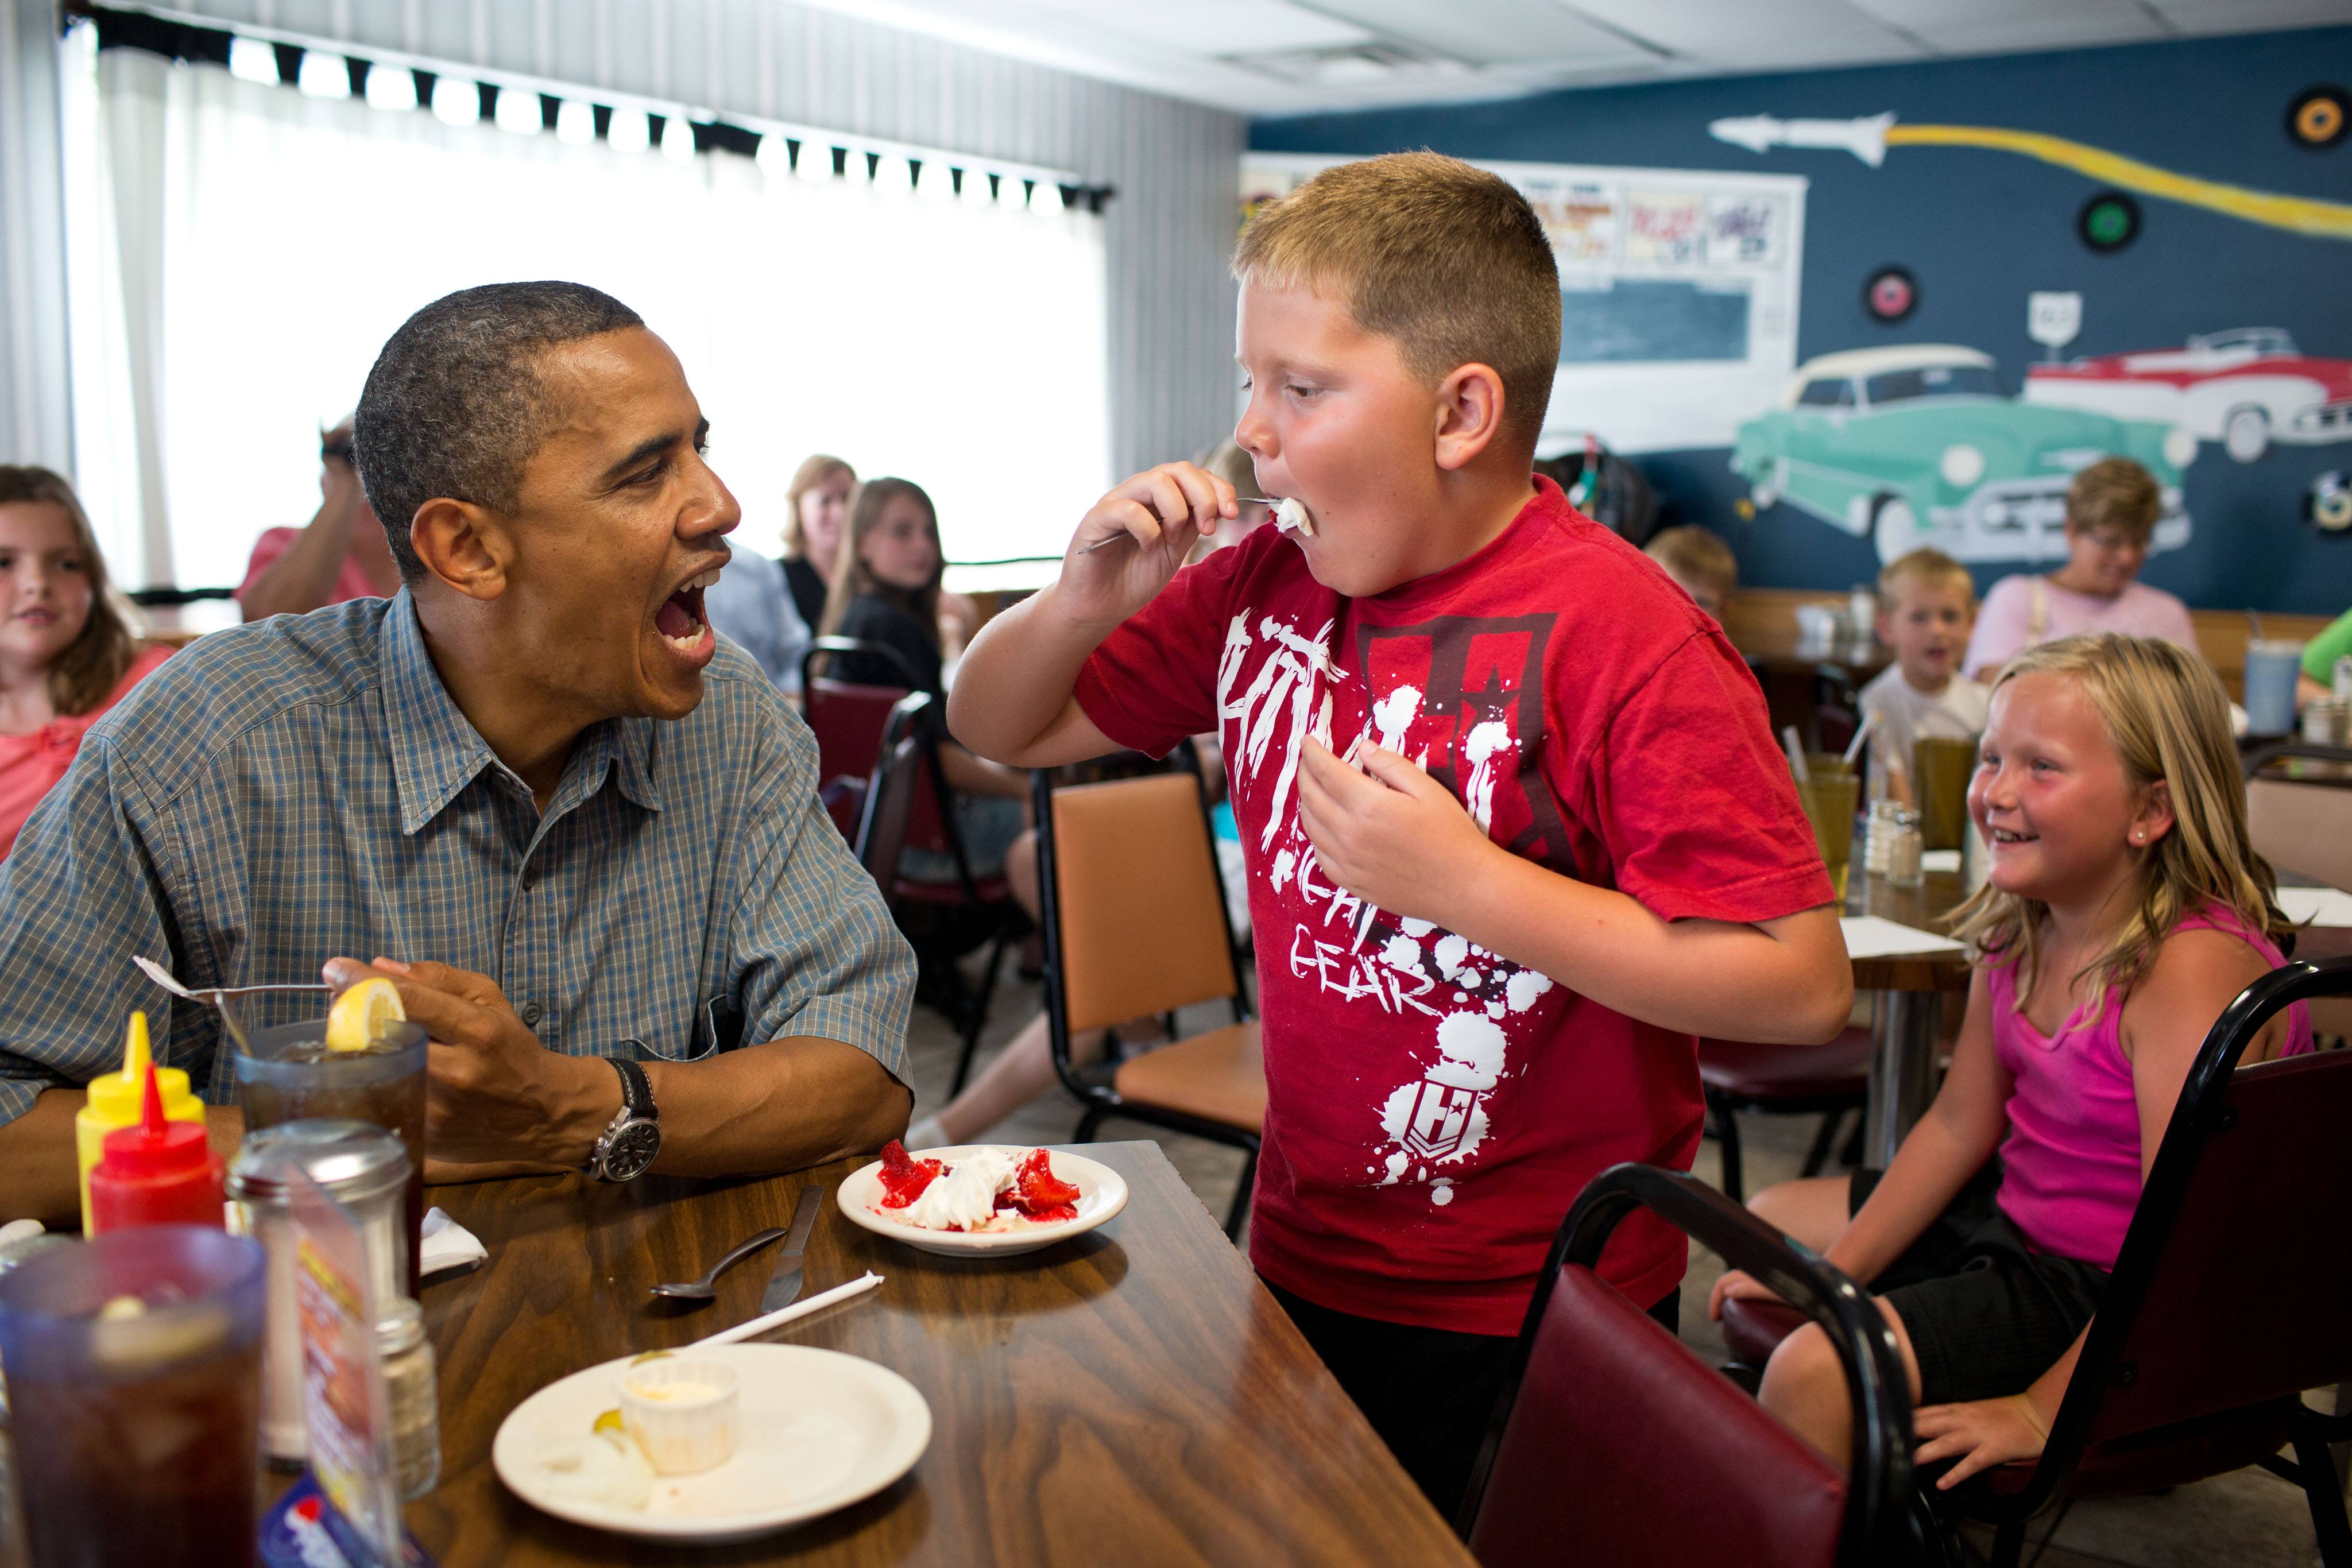 Barack Obama shares his pie with a child